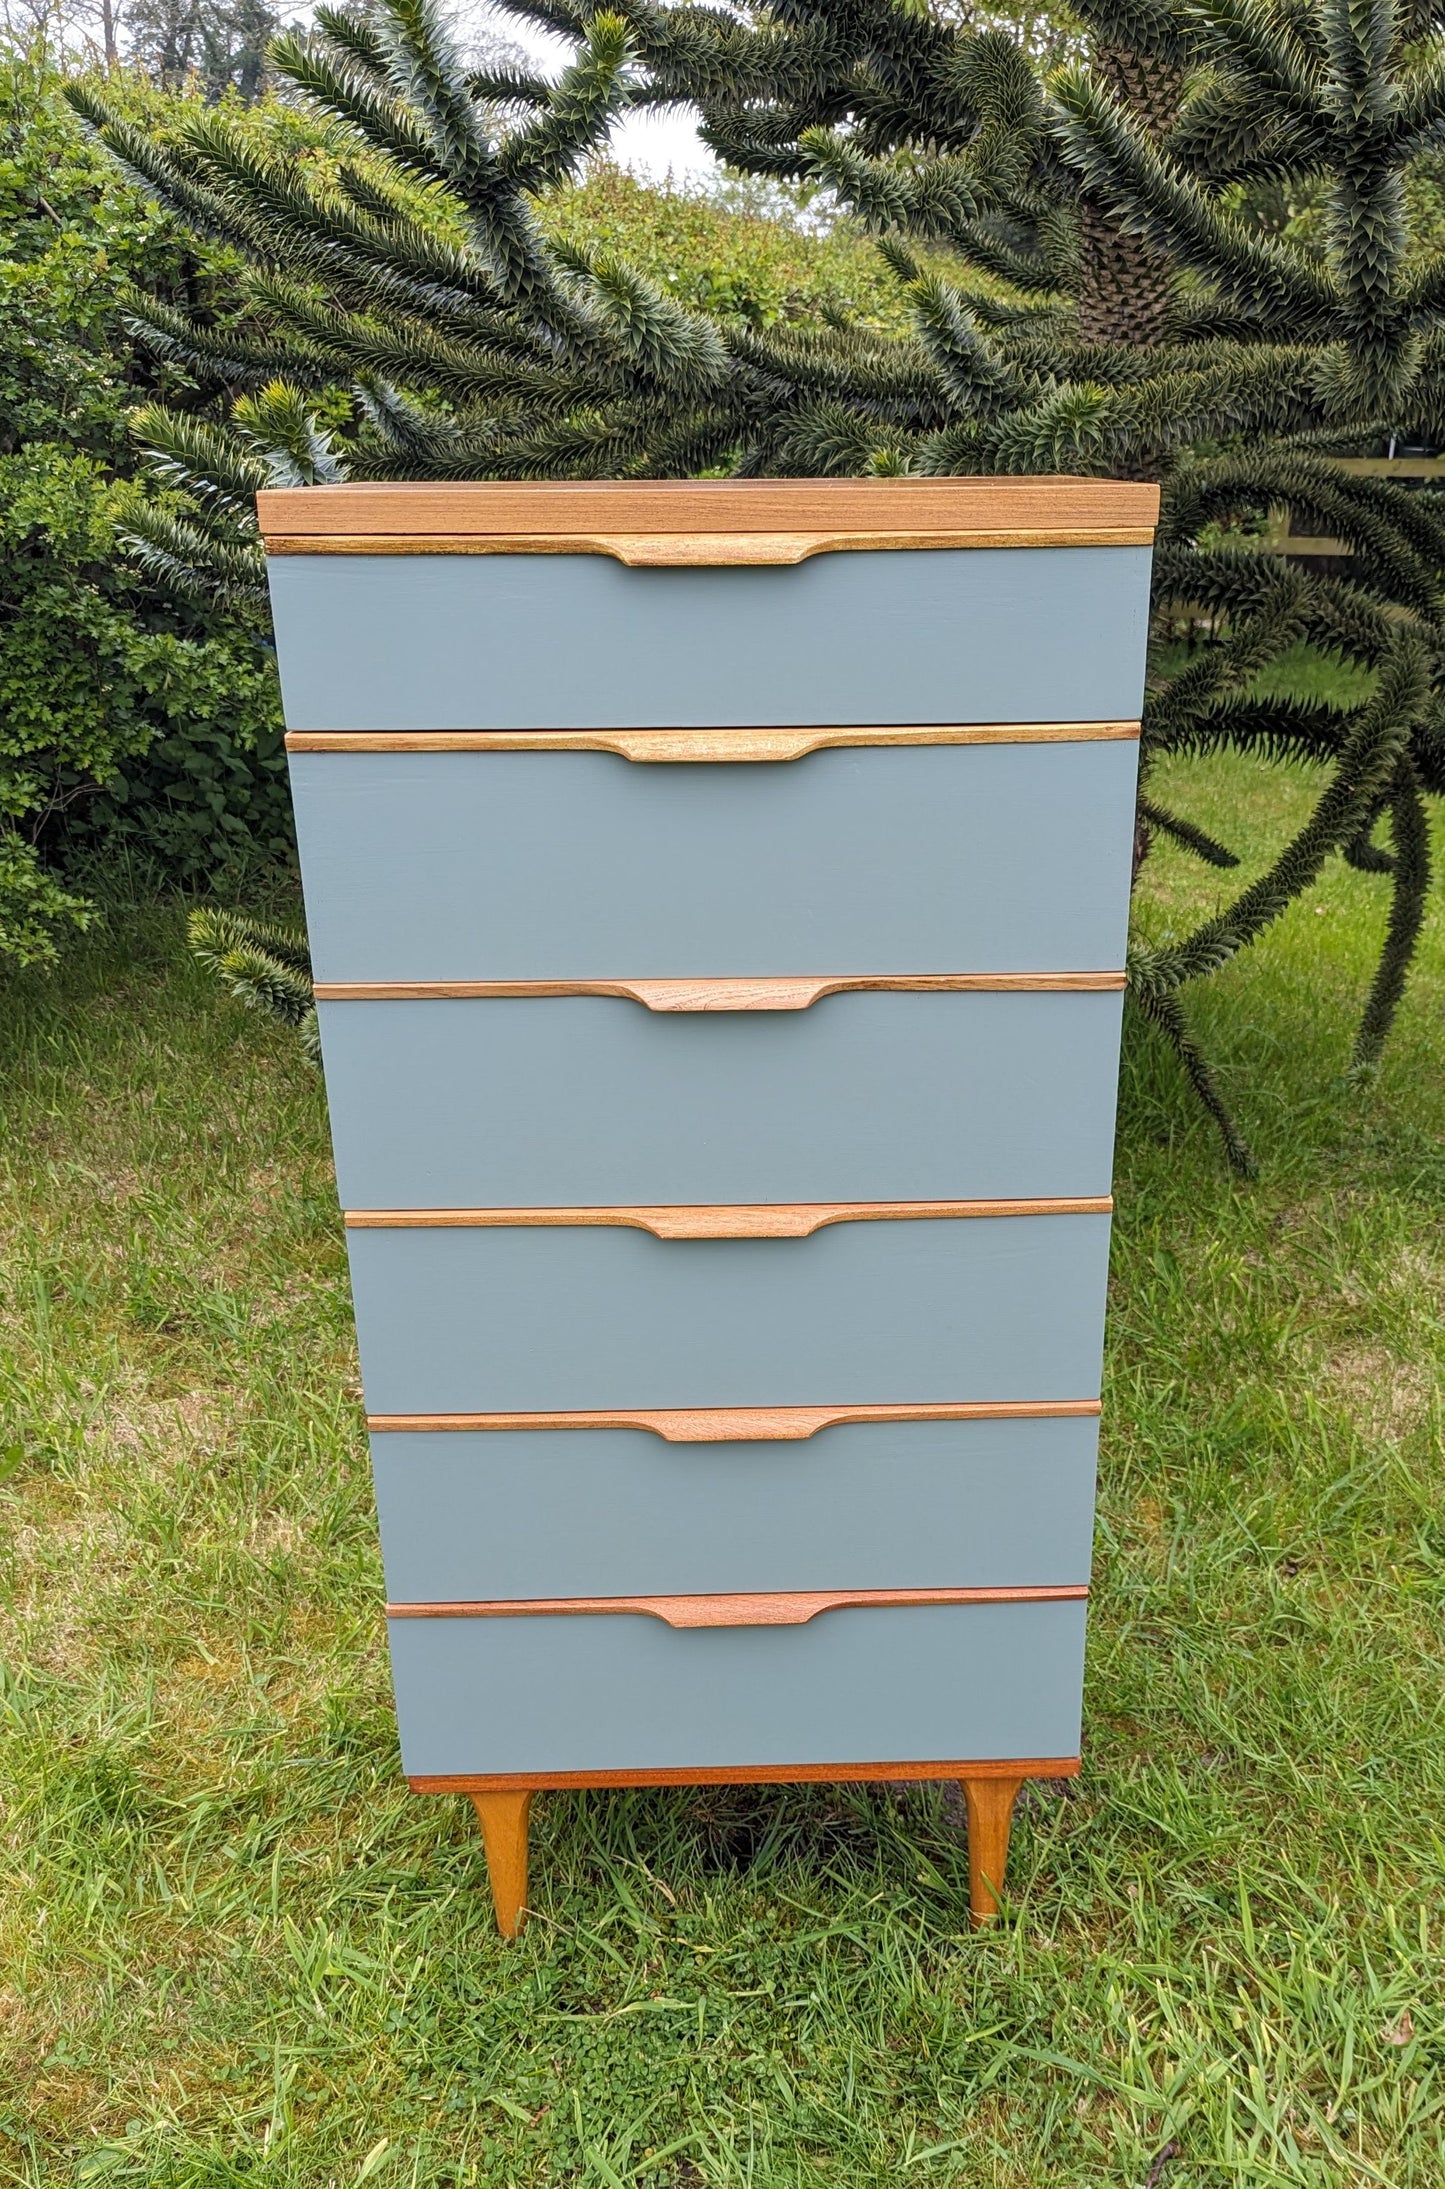 Vintage 1960s Austinsuite Painted & Teak Tall Boy Chest - Delivery Available